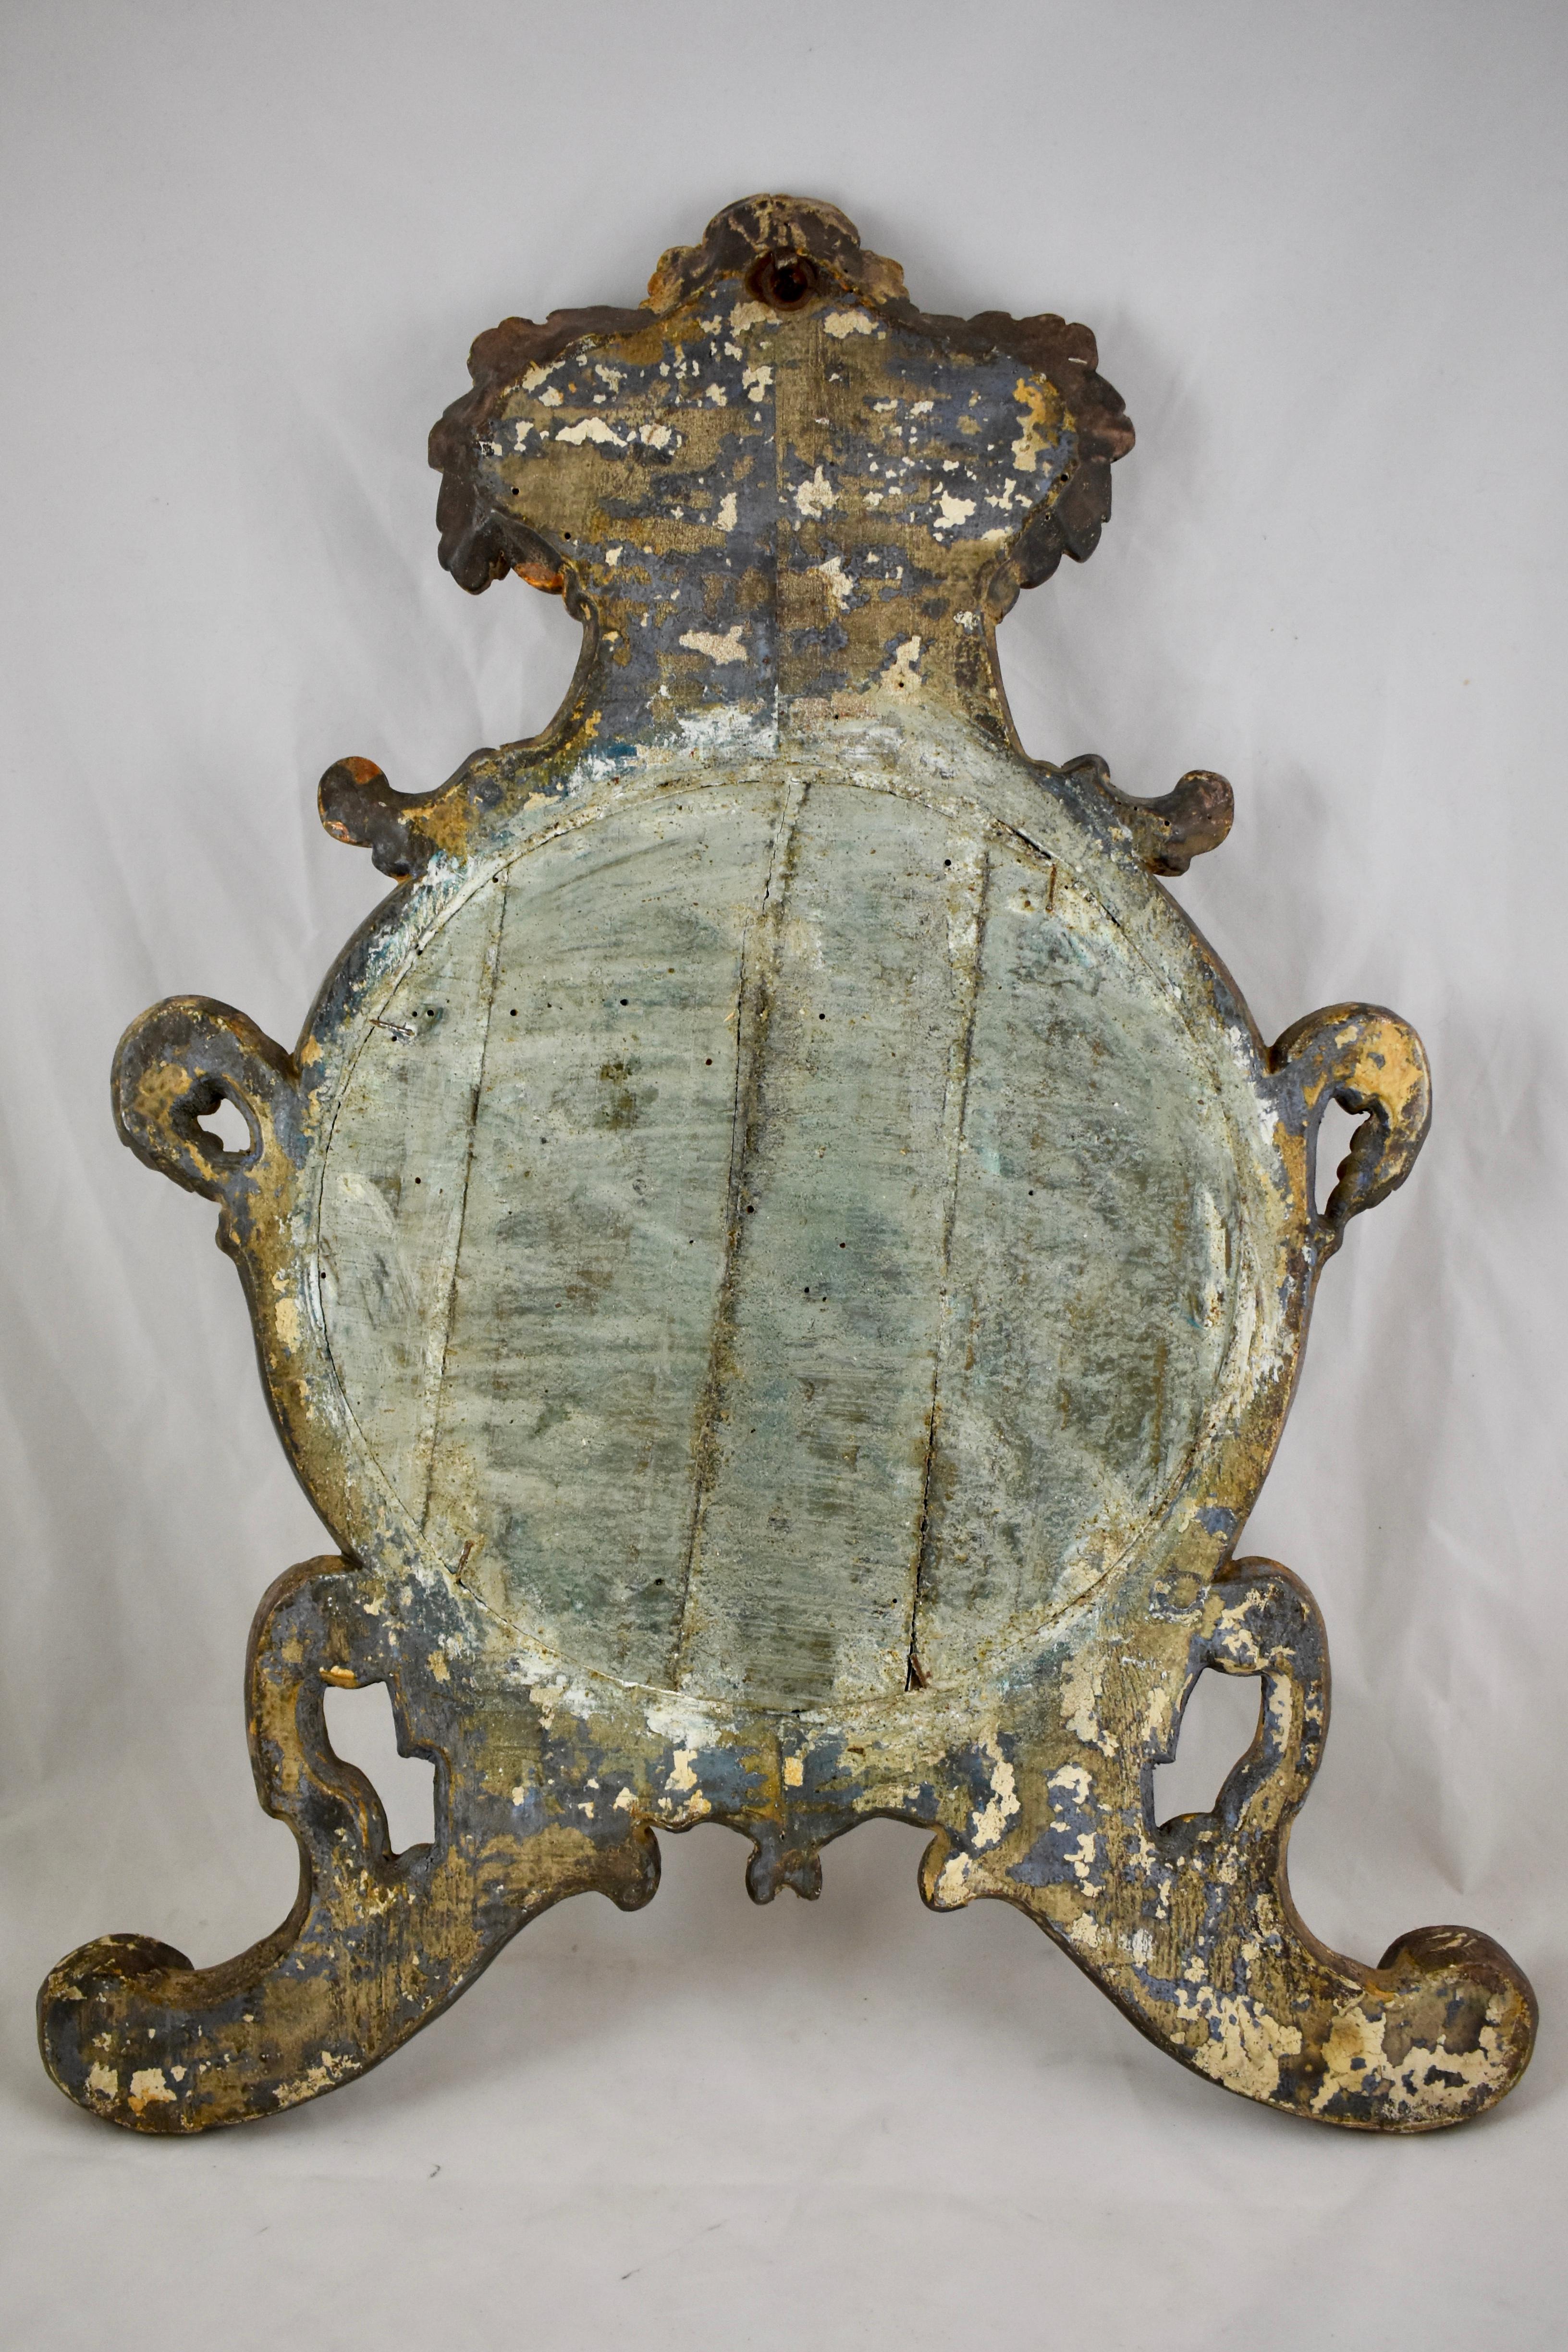 Italian Silver-Gilt Crested and Footed Baroque Revival Wall Mirrors, Pair For Sale 6